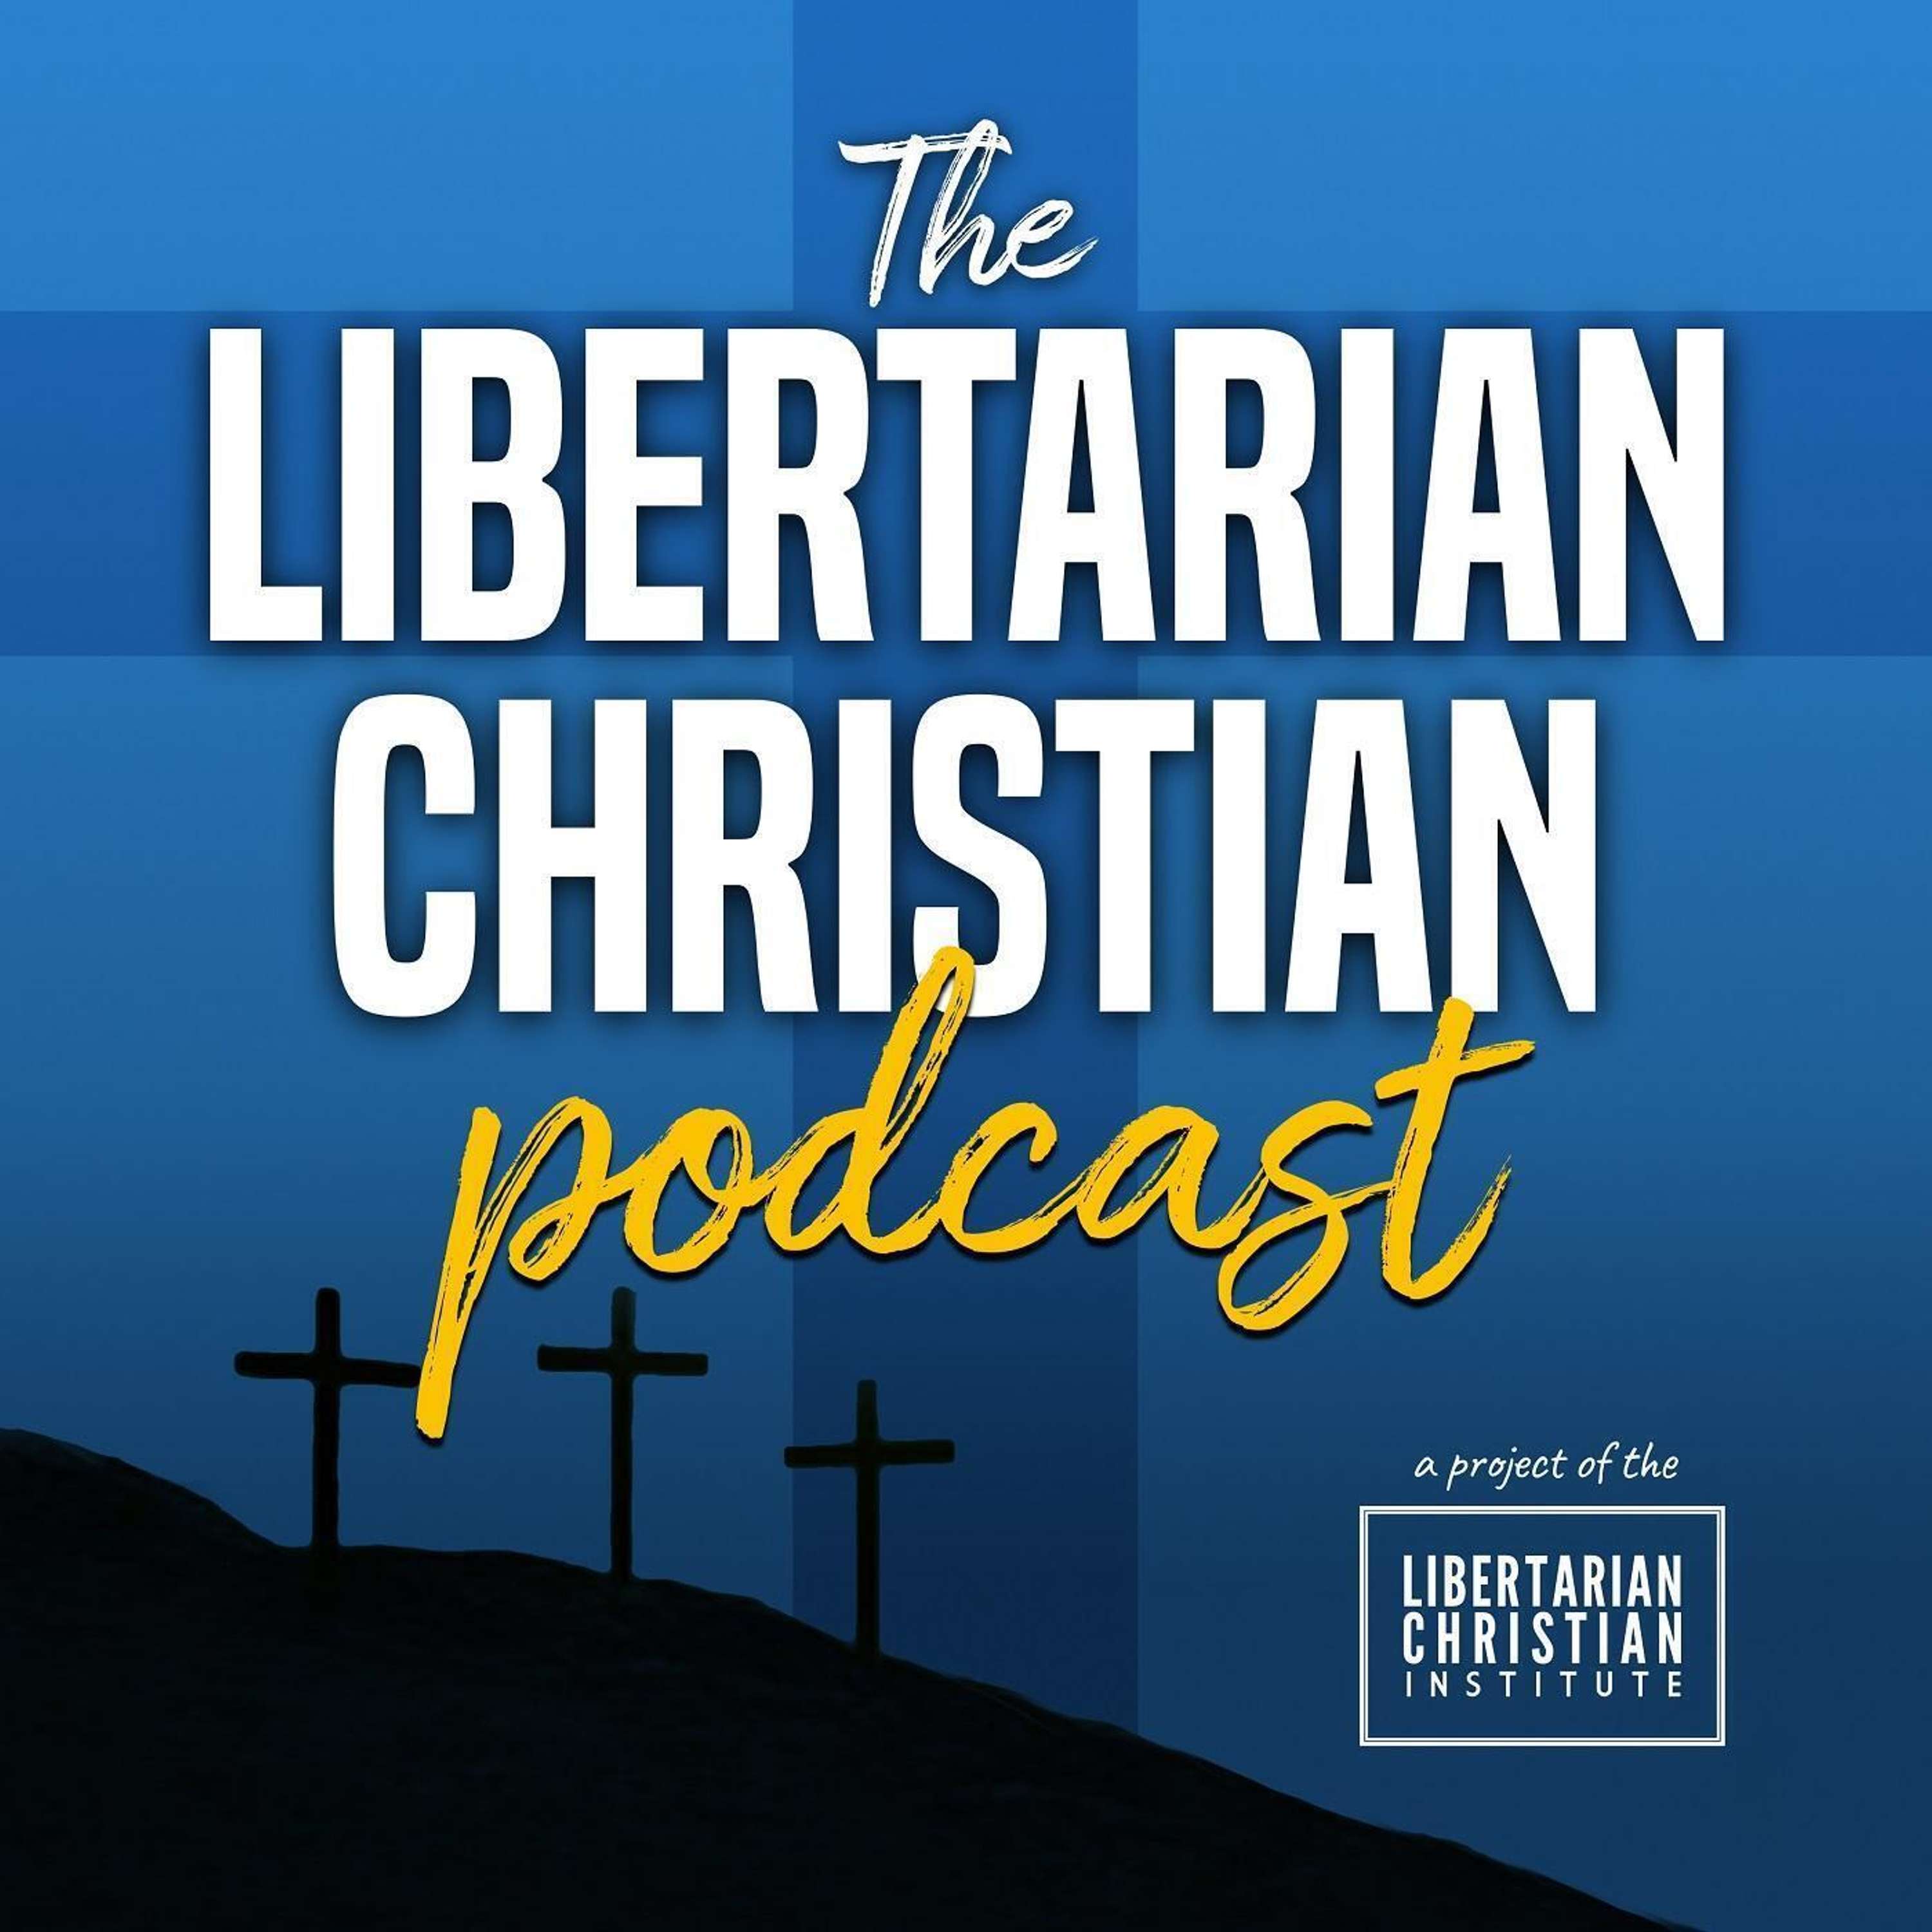 Ep 308: Christian Nationalism in the United States, with Paul D. Miller